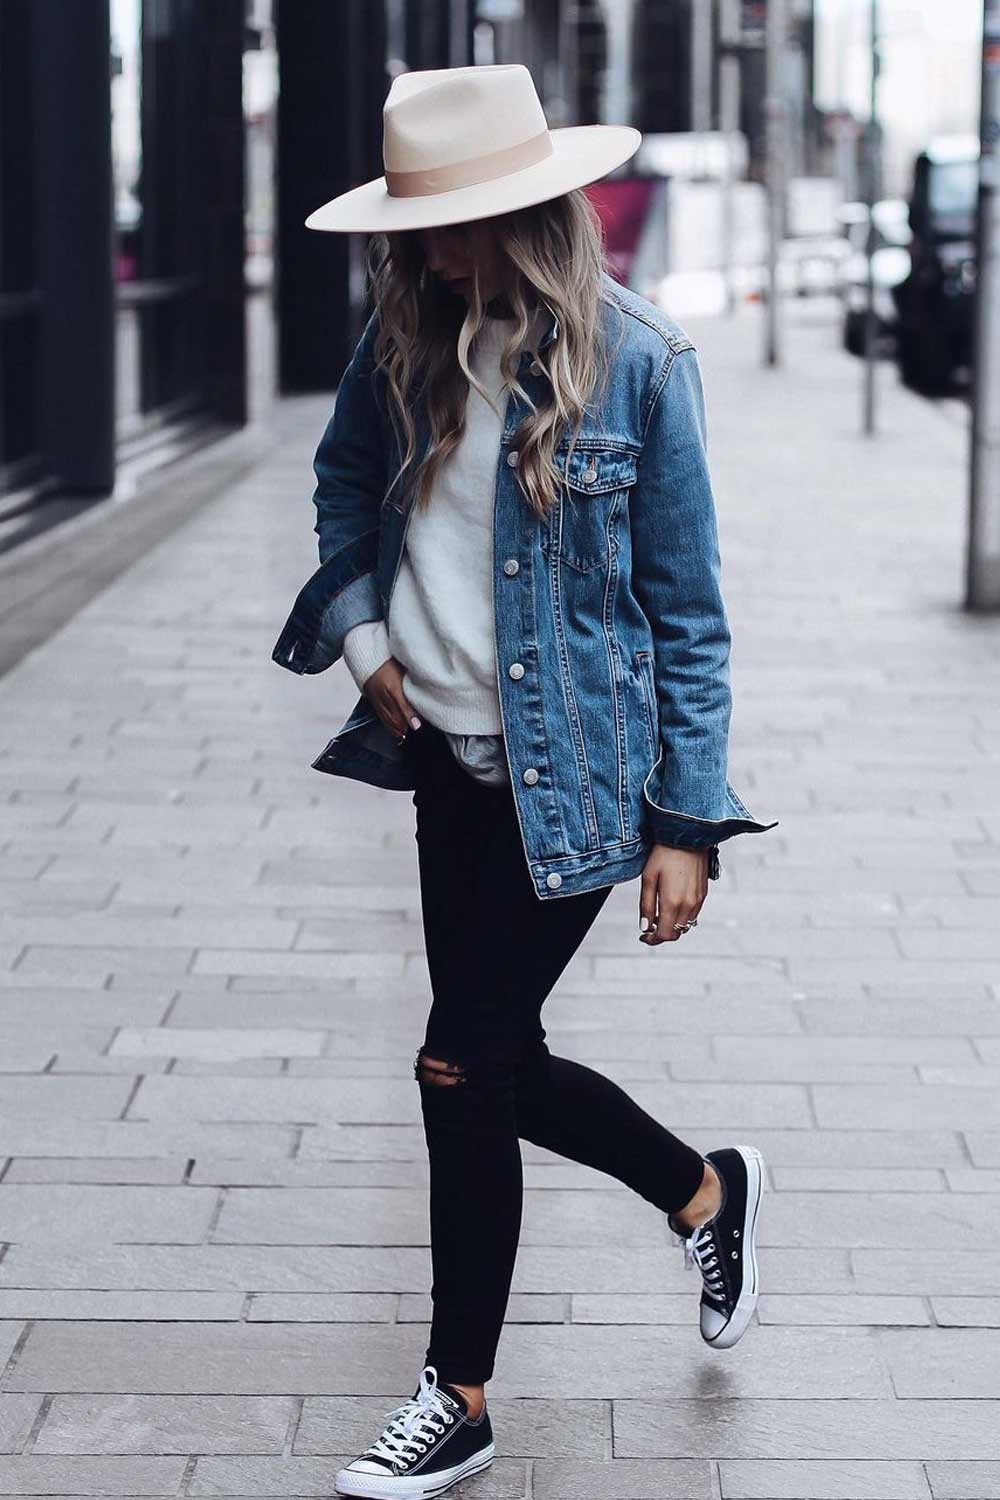 Denim Jacket Outfits with Ripped Jeans